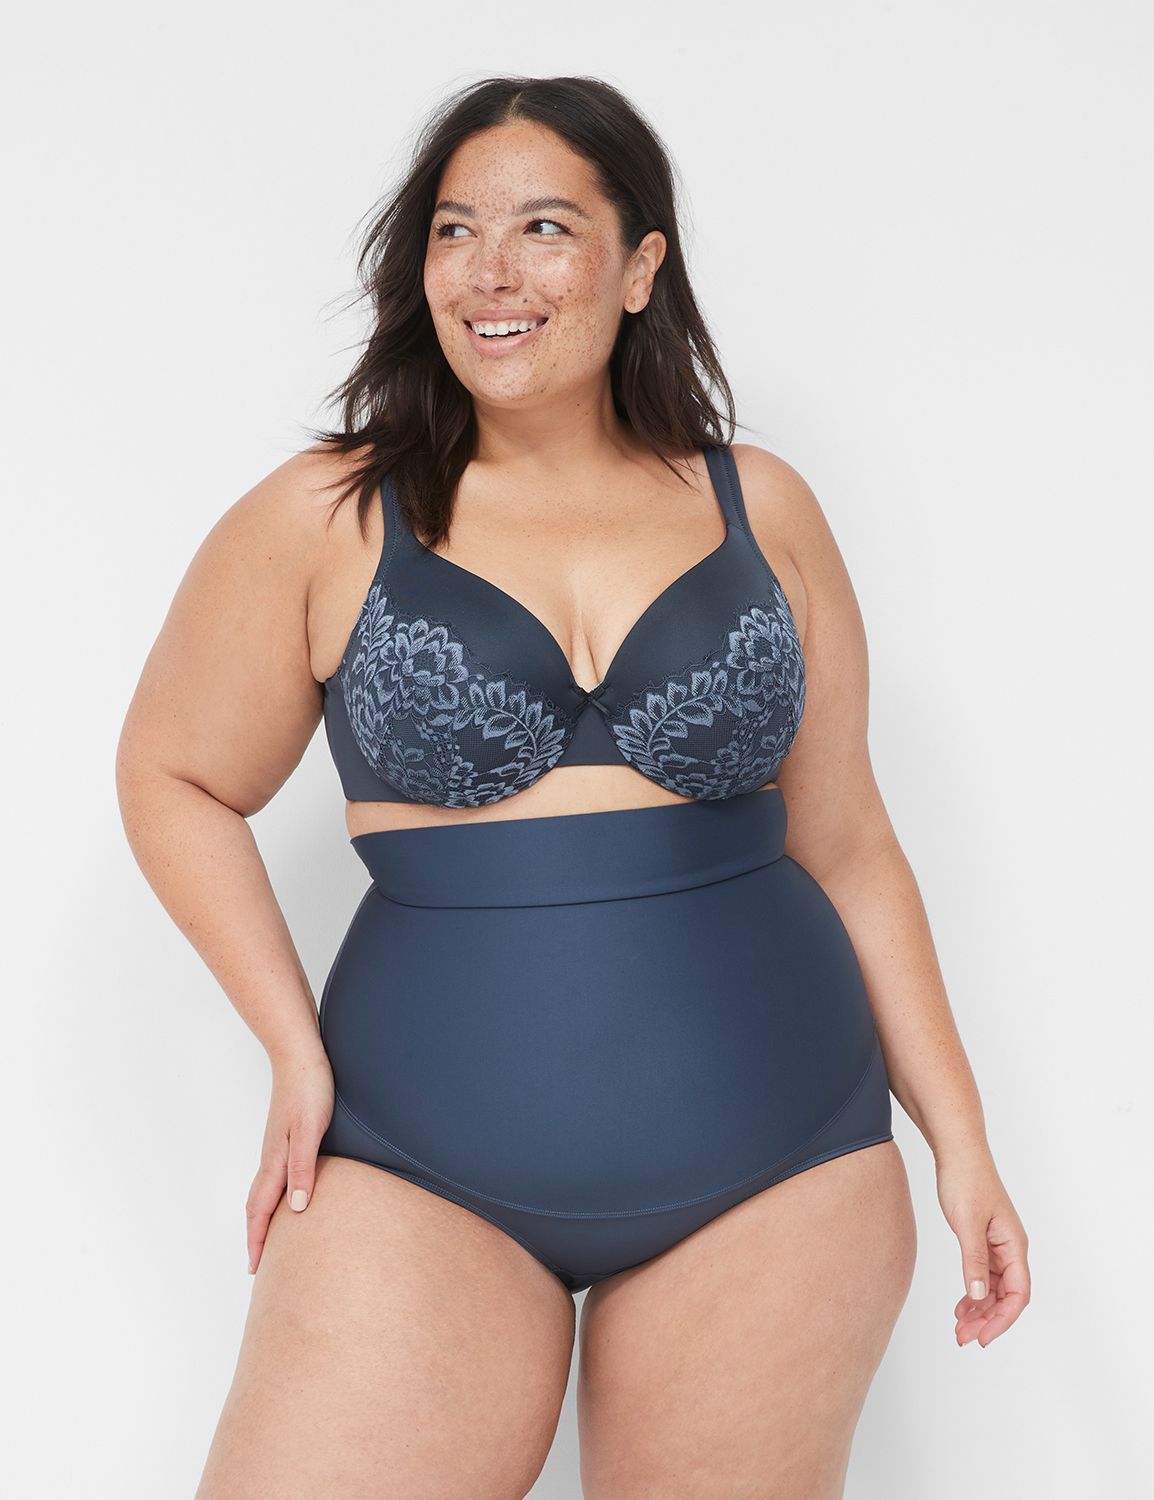 Lane Bryant - Our Leap Day Treat for you! $29 bras in the most beautifully breathable  cotton are here to spring-ify your top drawer 🌸 Shop